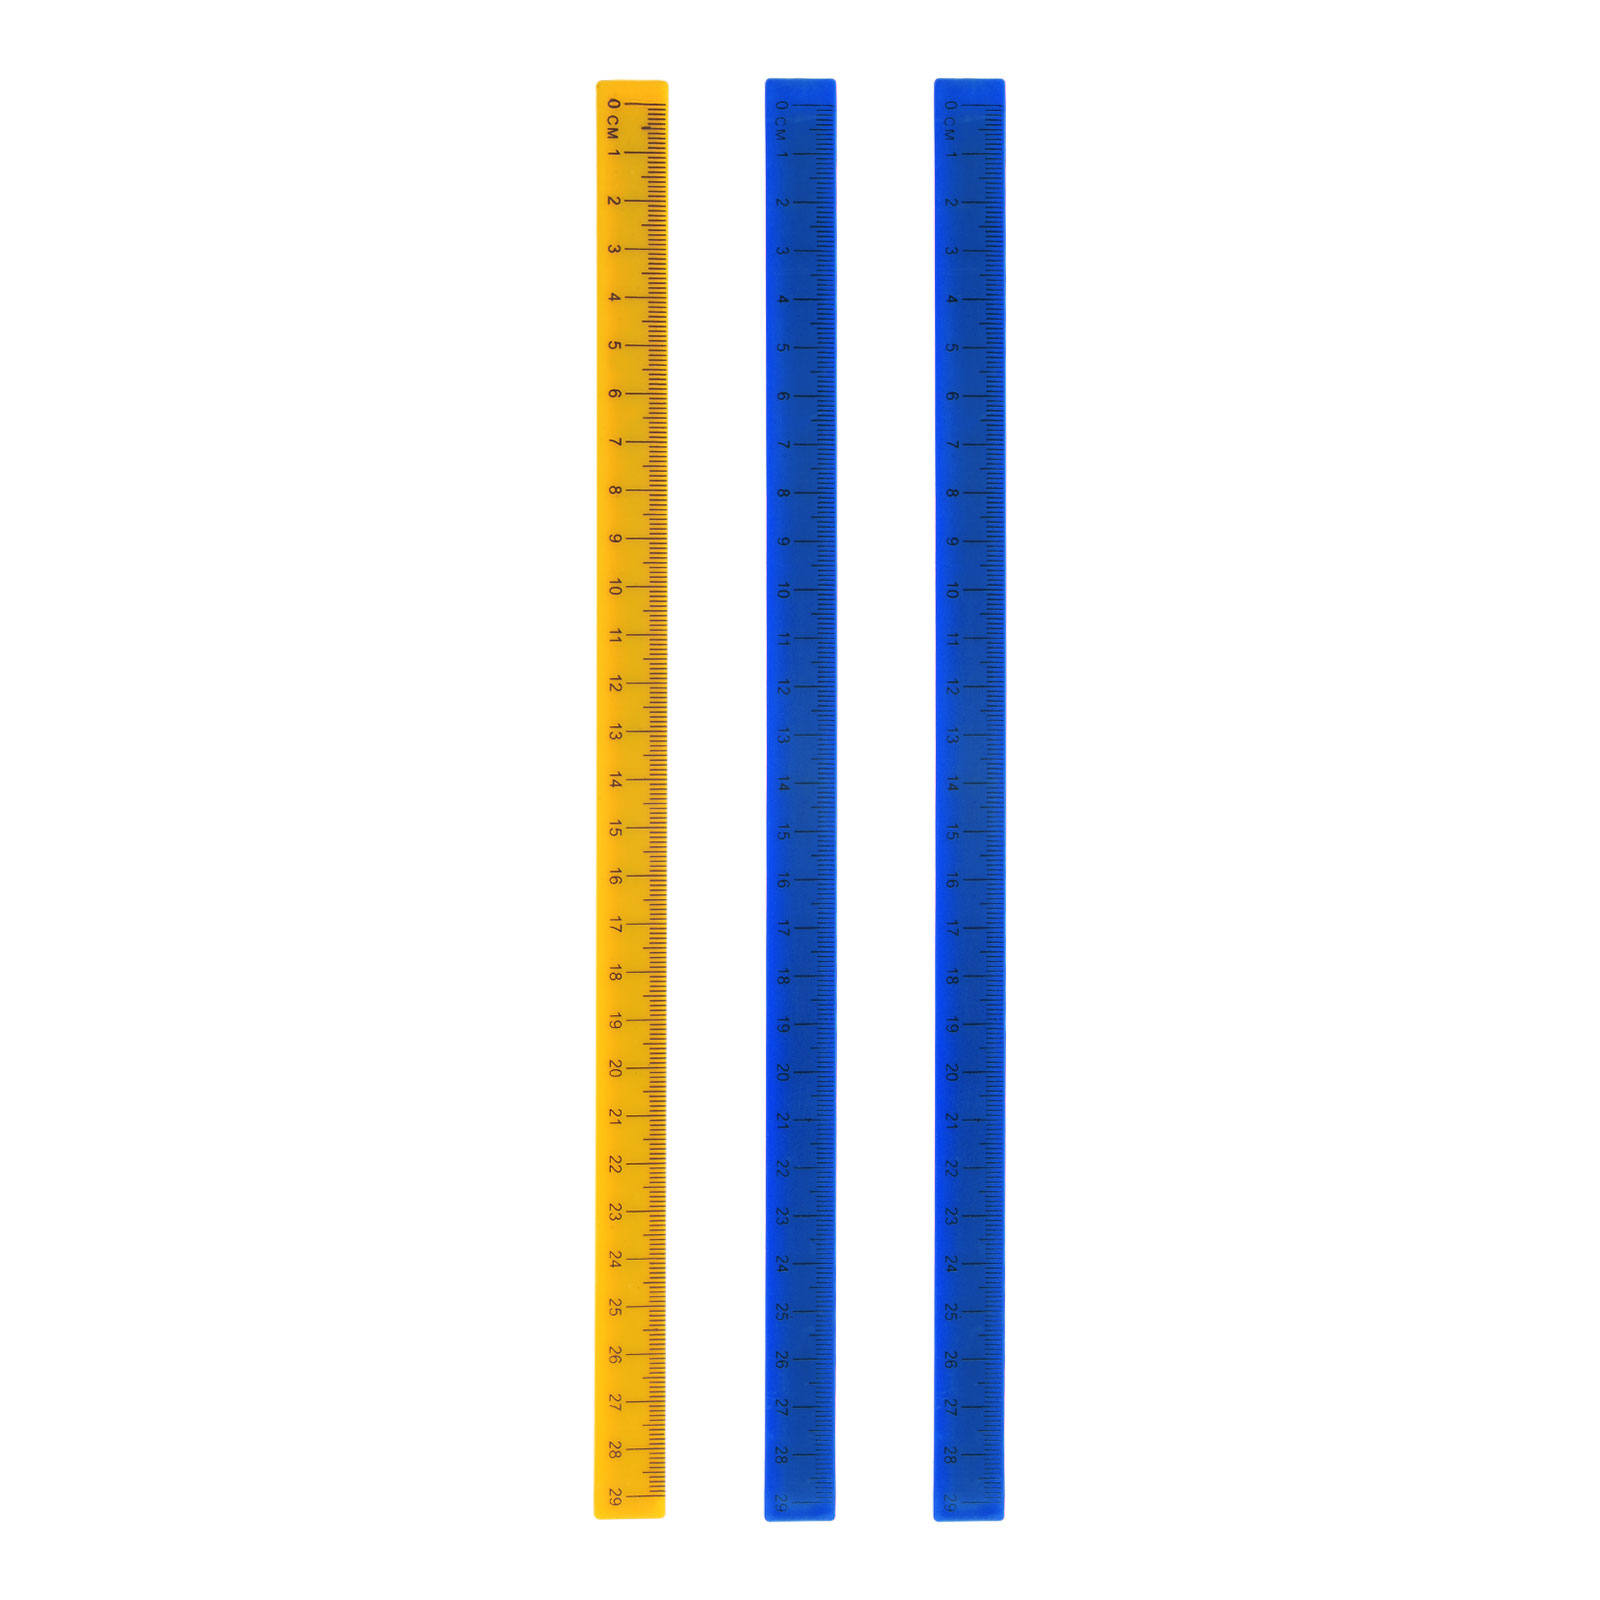 Uxcell 3pcs Whiteboard Magnetic Ruler 29cm Metric Blackboard Straight  Rulers Office Measuring Tools, Yellow Deep Blue